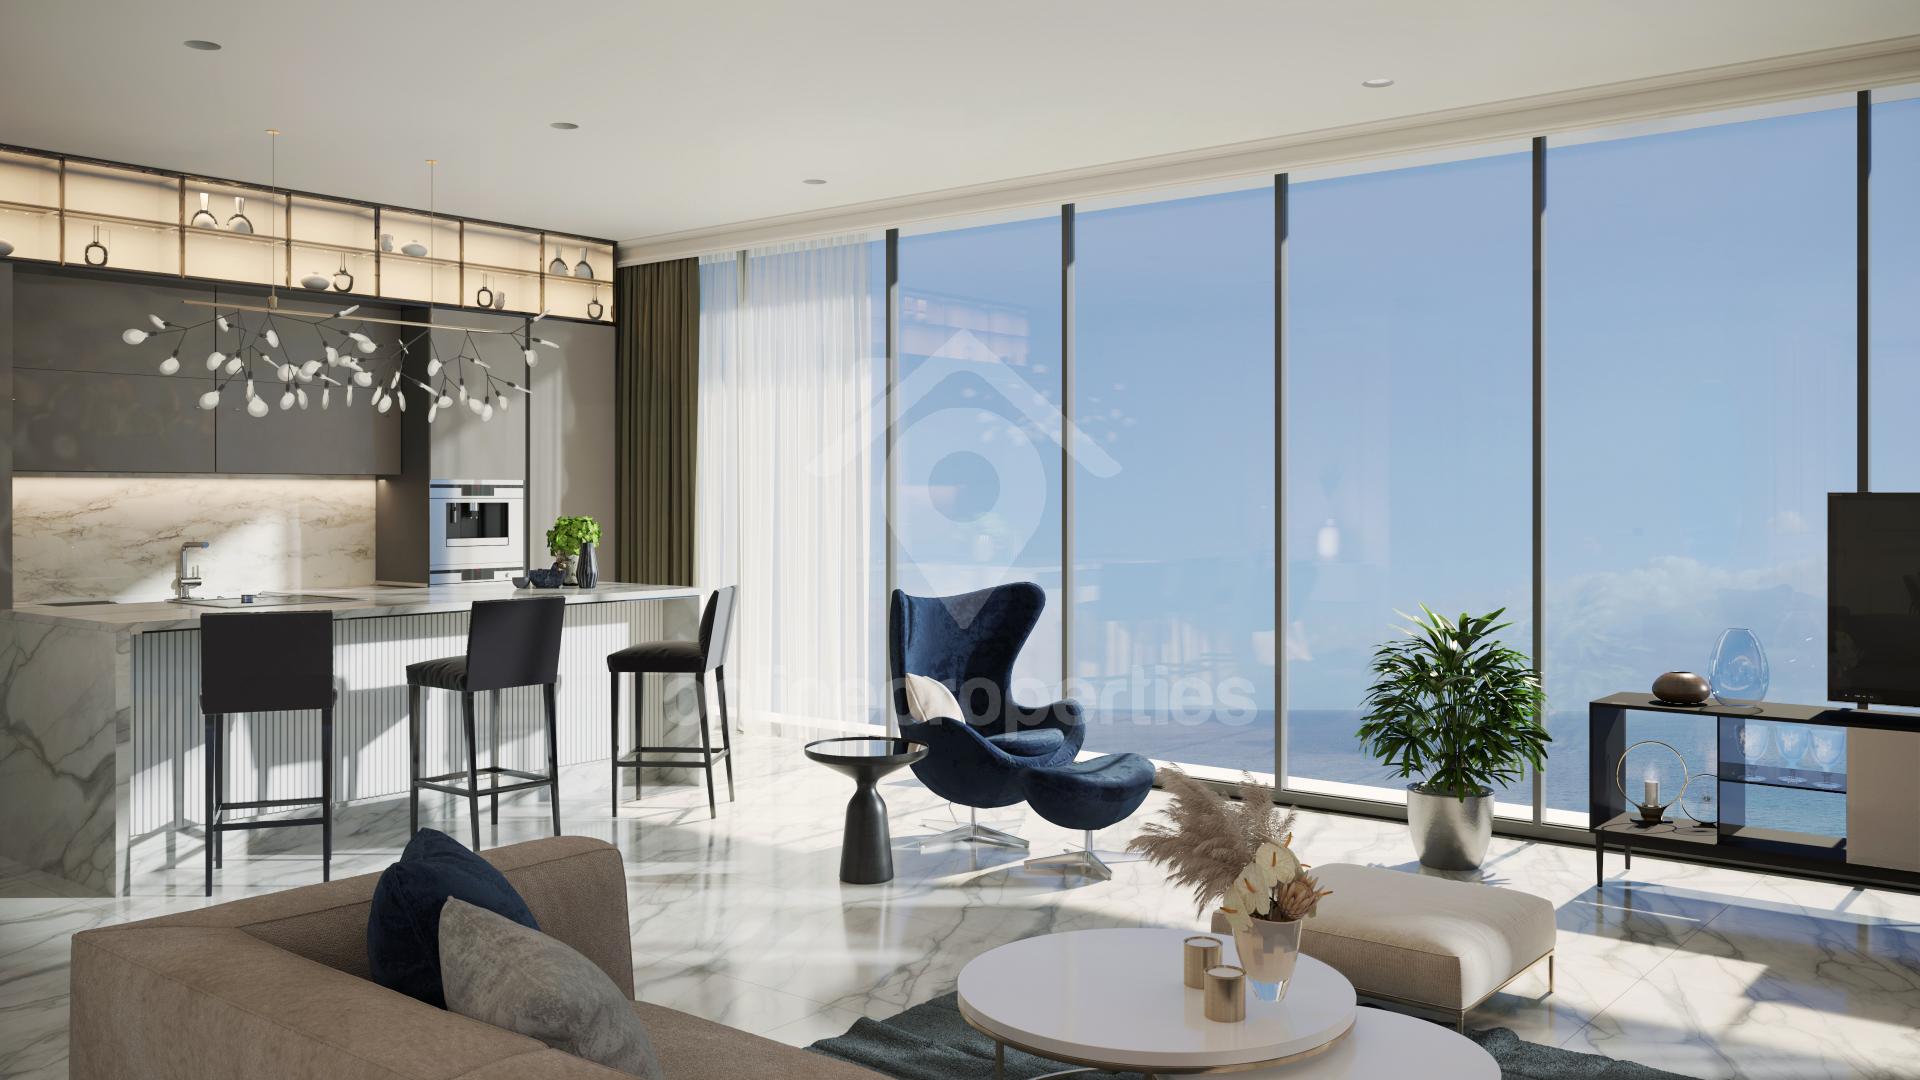 Beachside Living in a luxury high-rise 